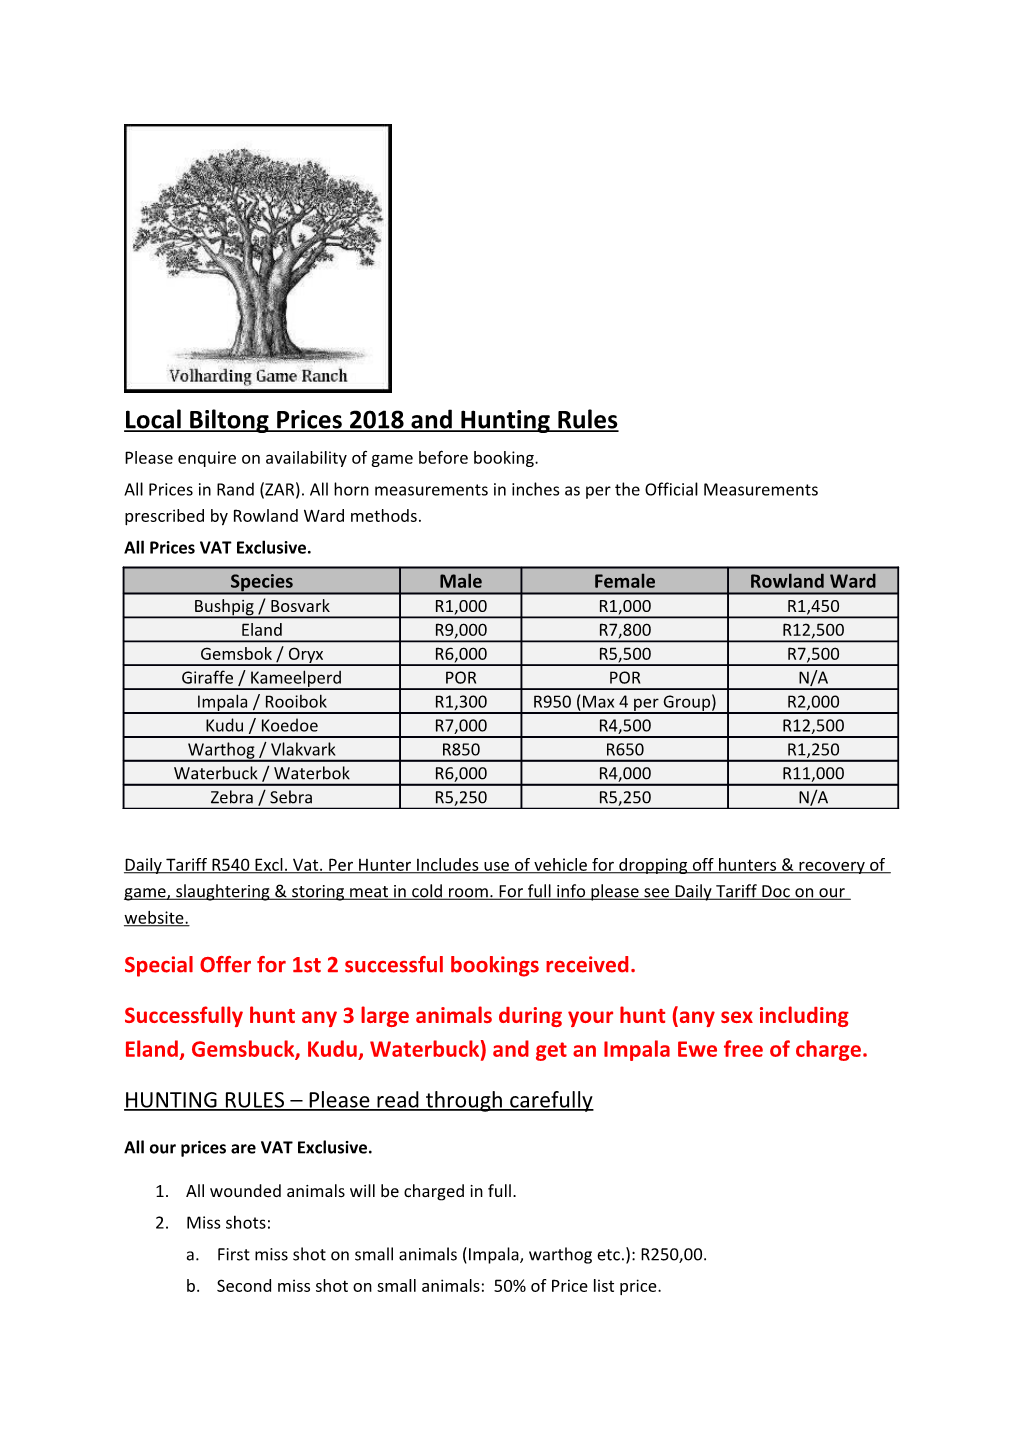 Local Biltong Prices 2018 and Hunting Rules